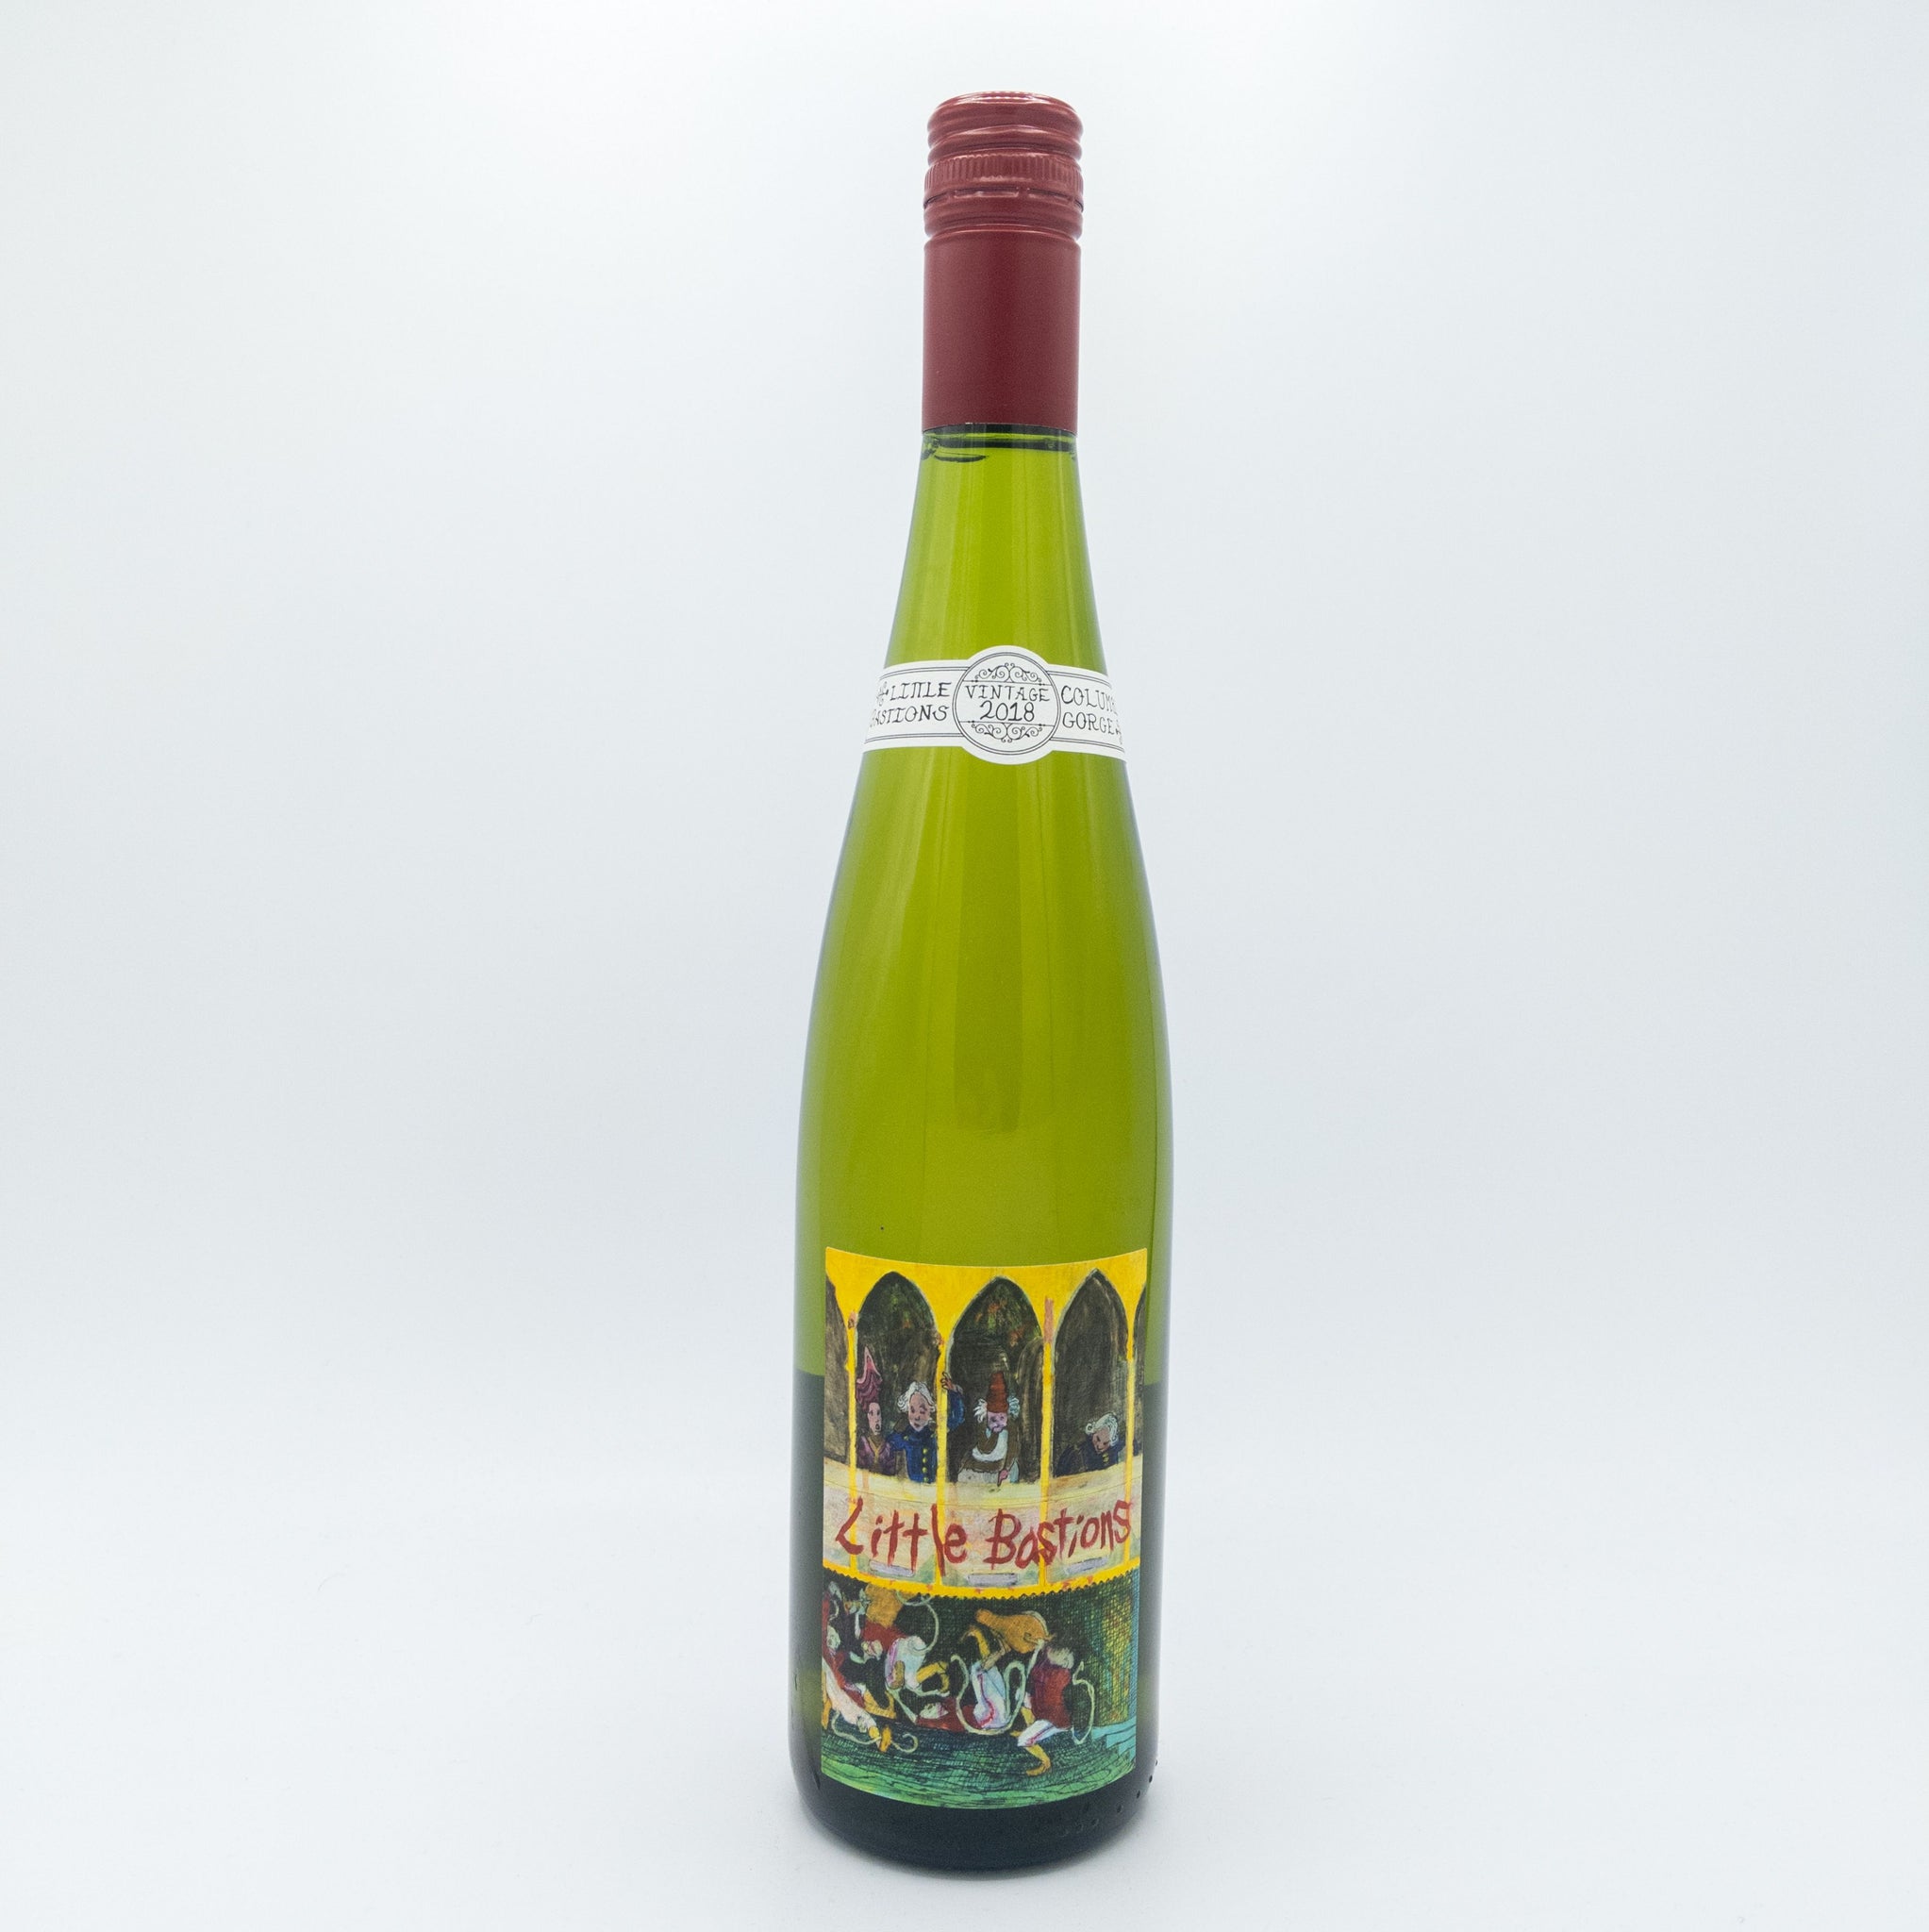 Little Bastions 'Riesling' 2019